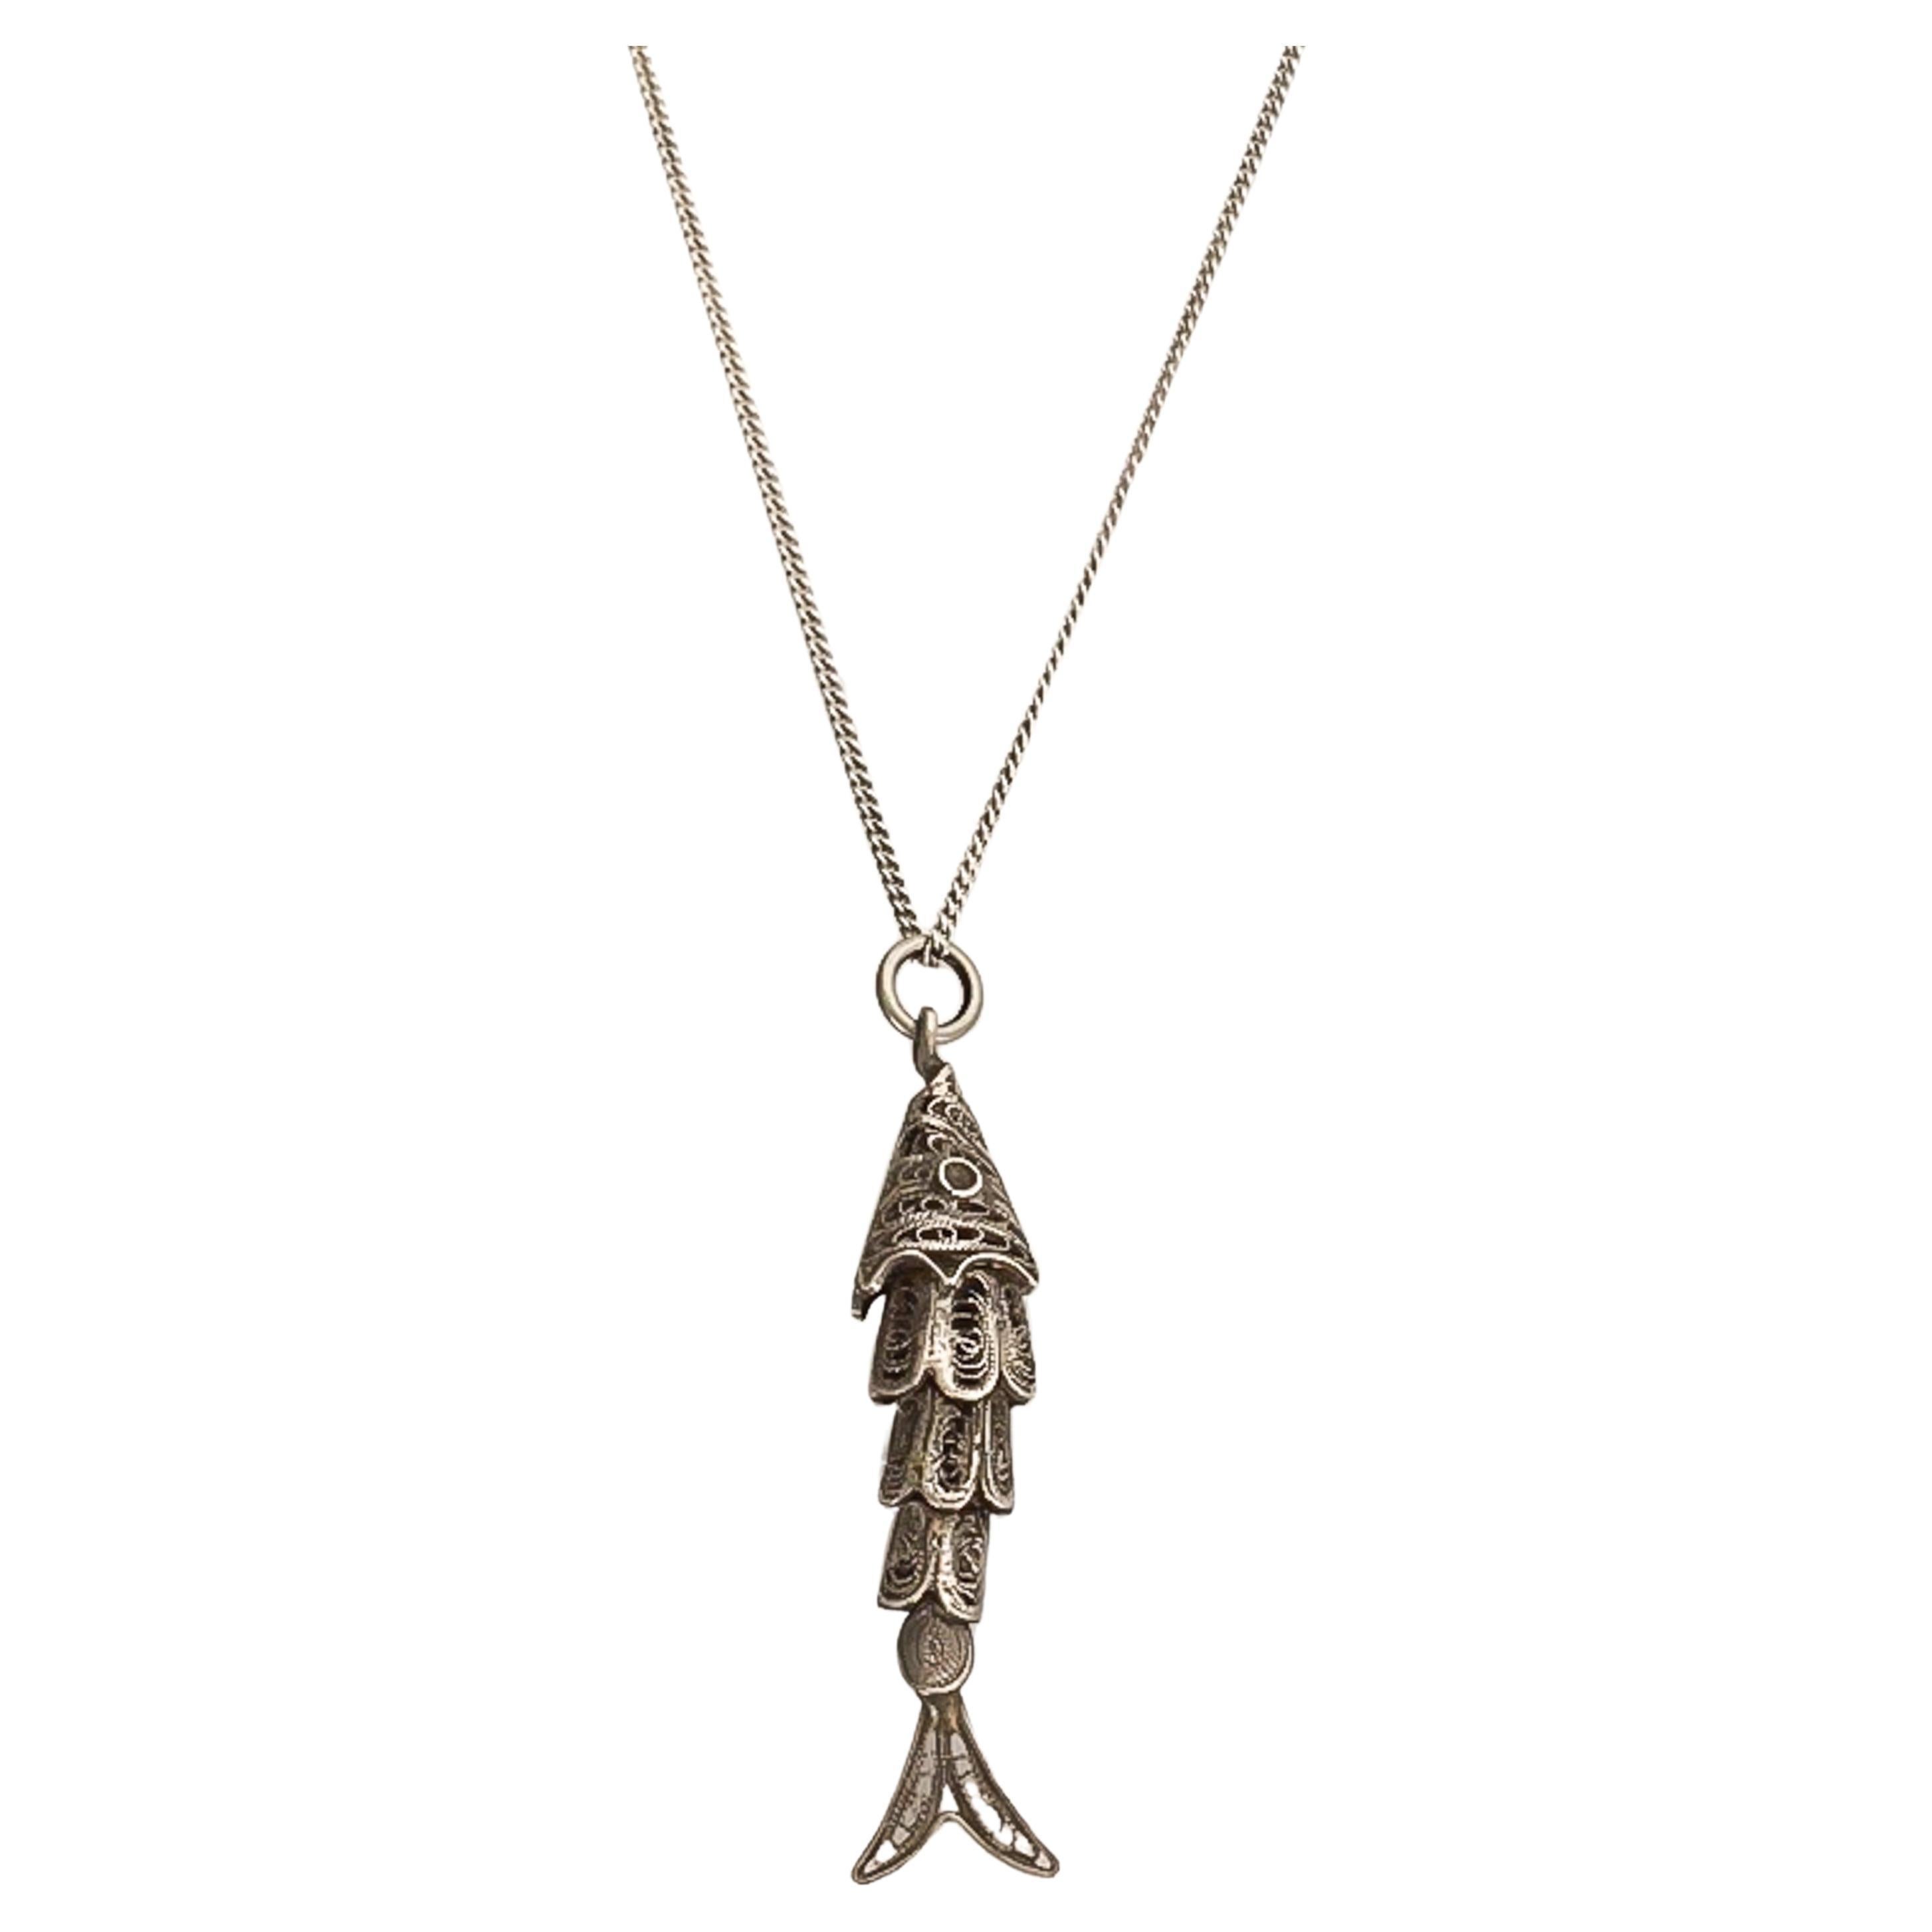 A vintage silver articulated fish charm made of four movable segments, which are finely handcrafted with filigree. It's a lovely charm to add to your charm bracelet, wear as a necklace or stacked with your other favorite pieces. The charm comes